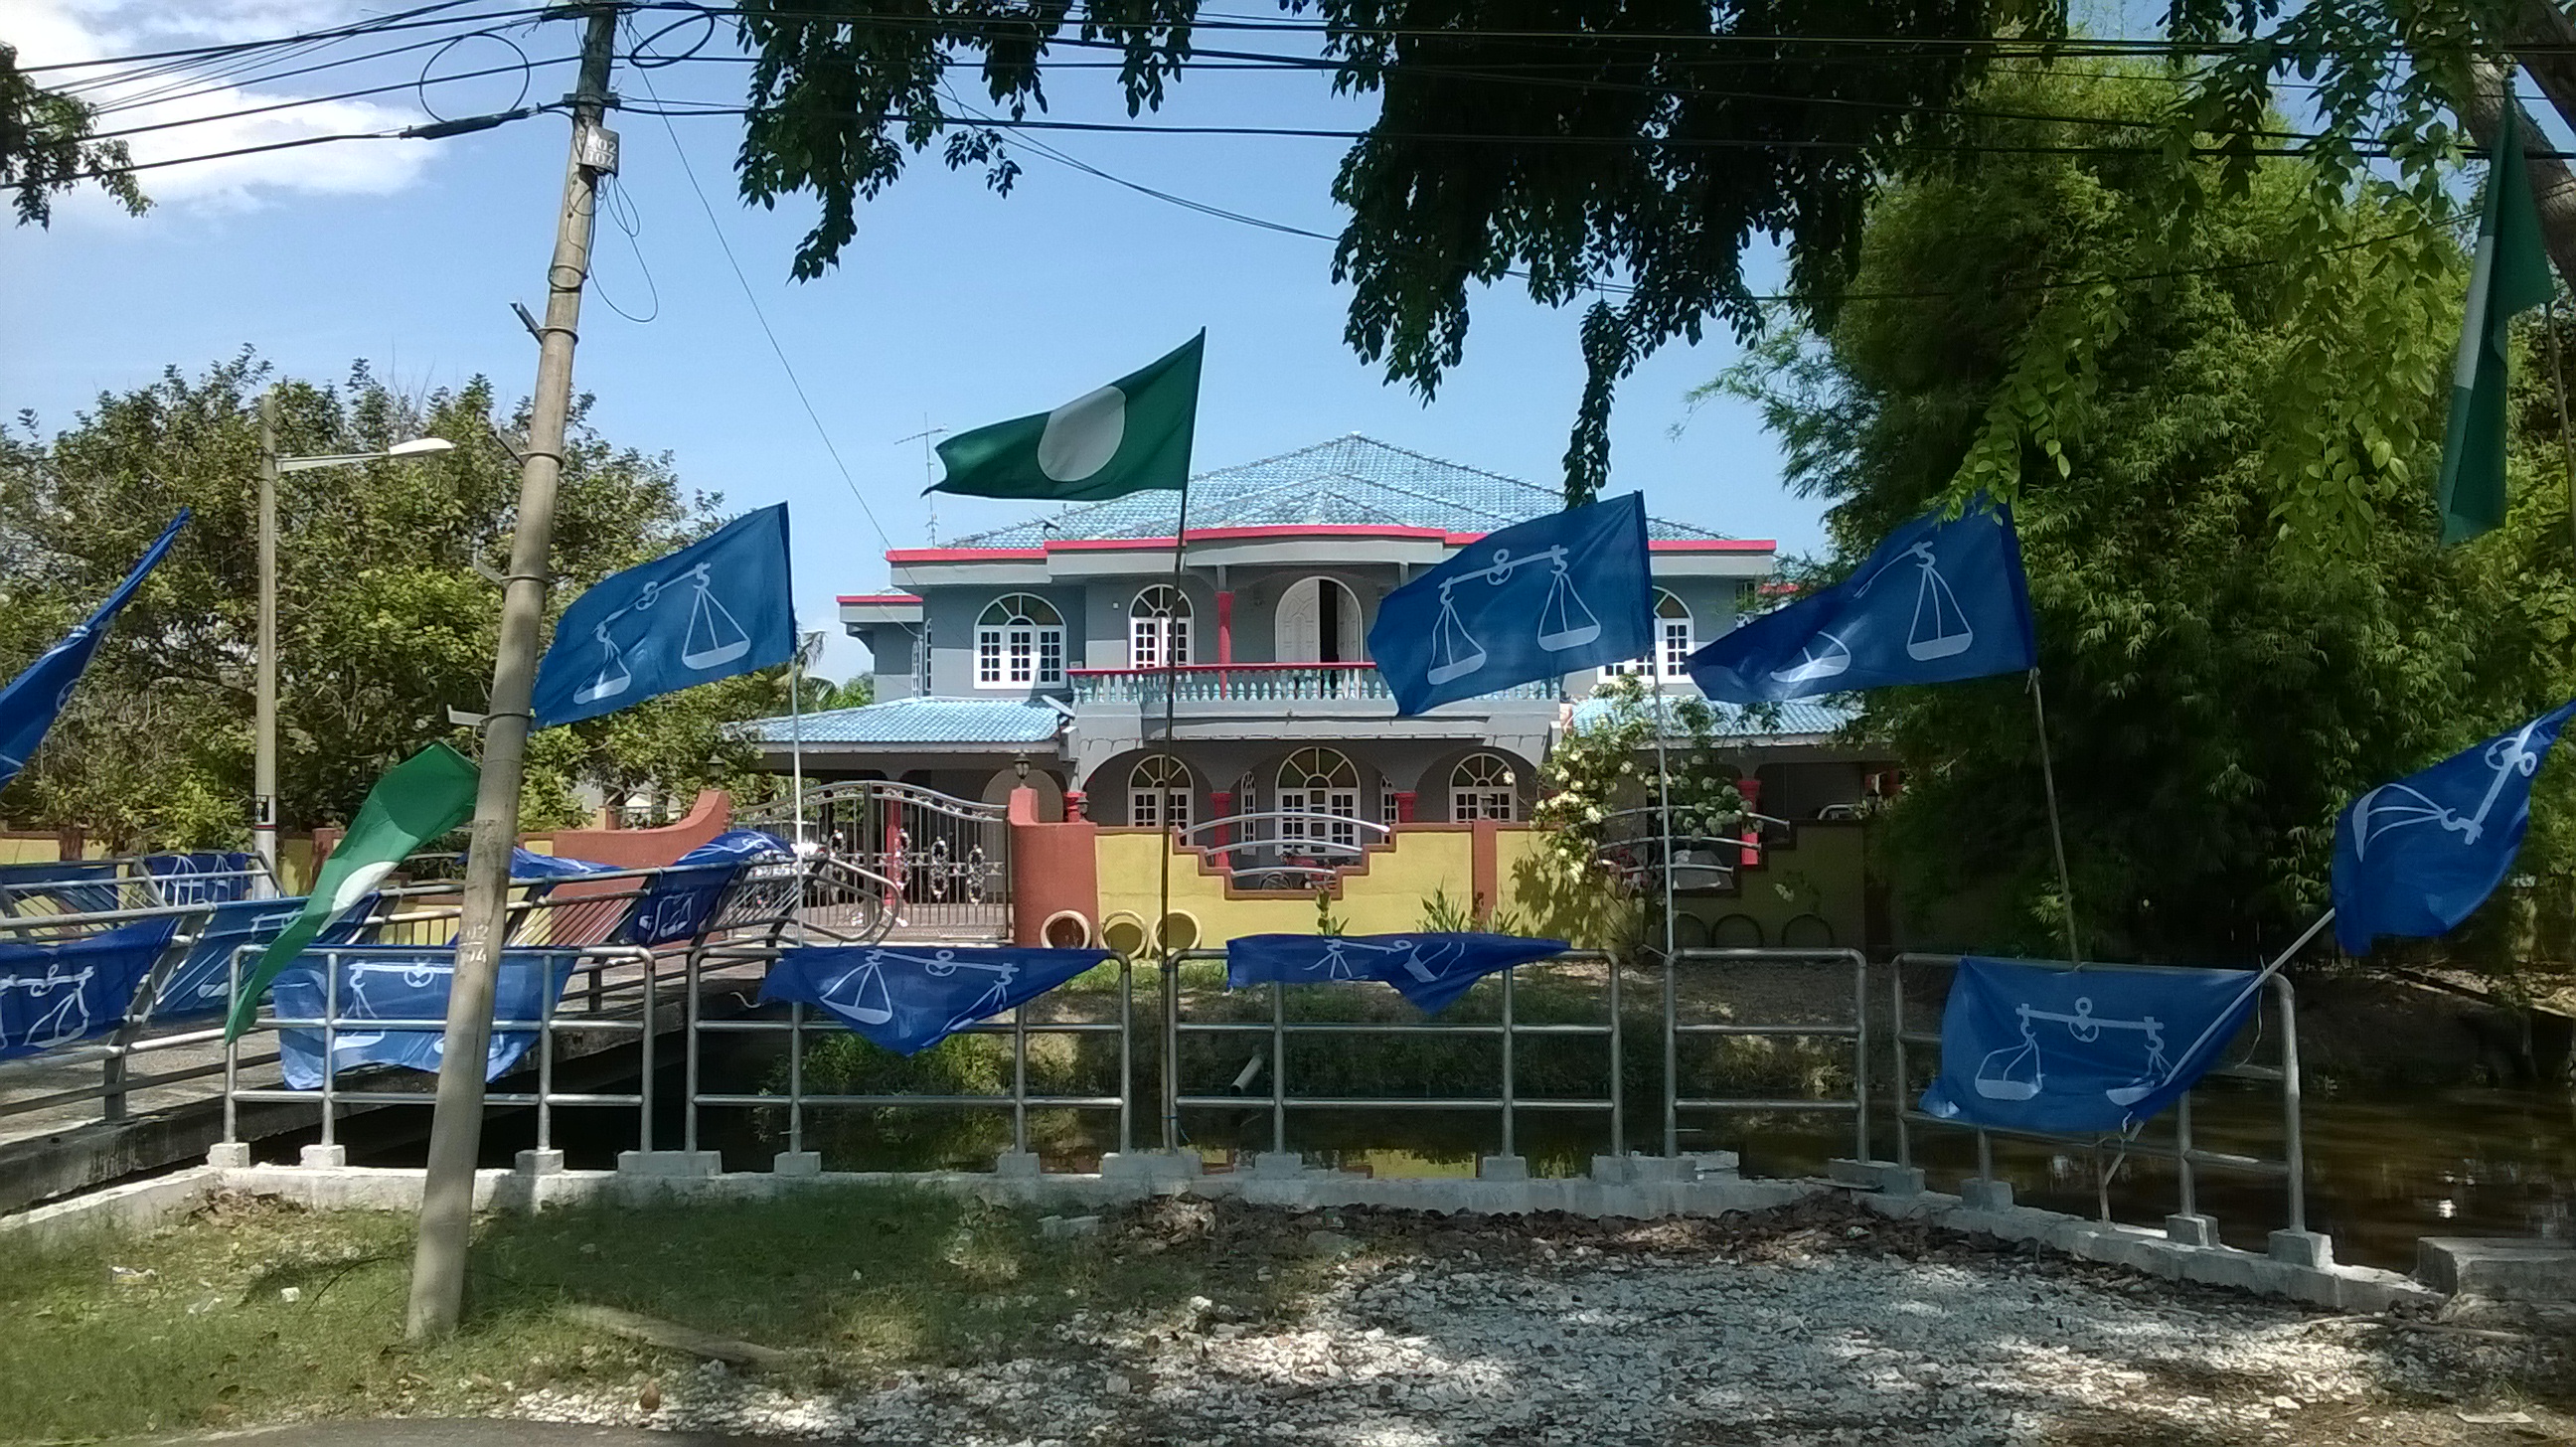 BN flags easily outnumbered PAS and Amanah flags in Sungai Besar.